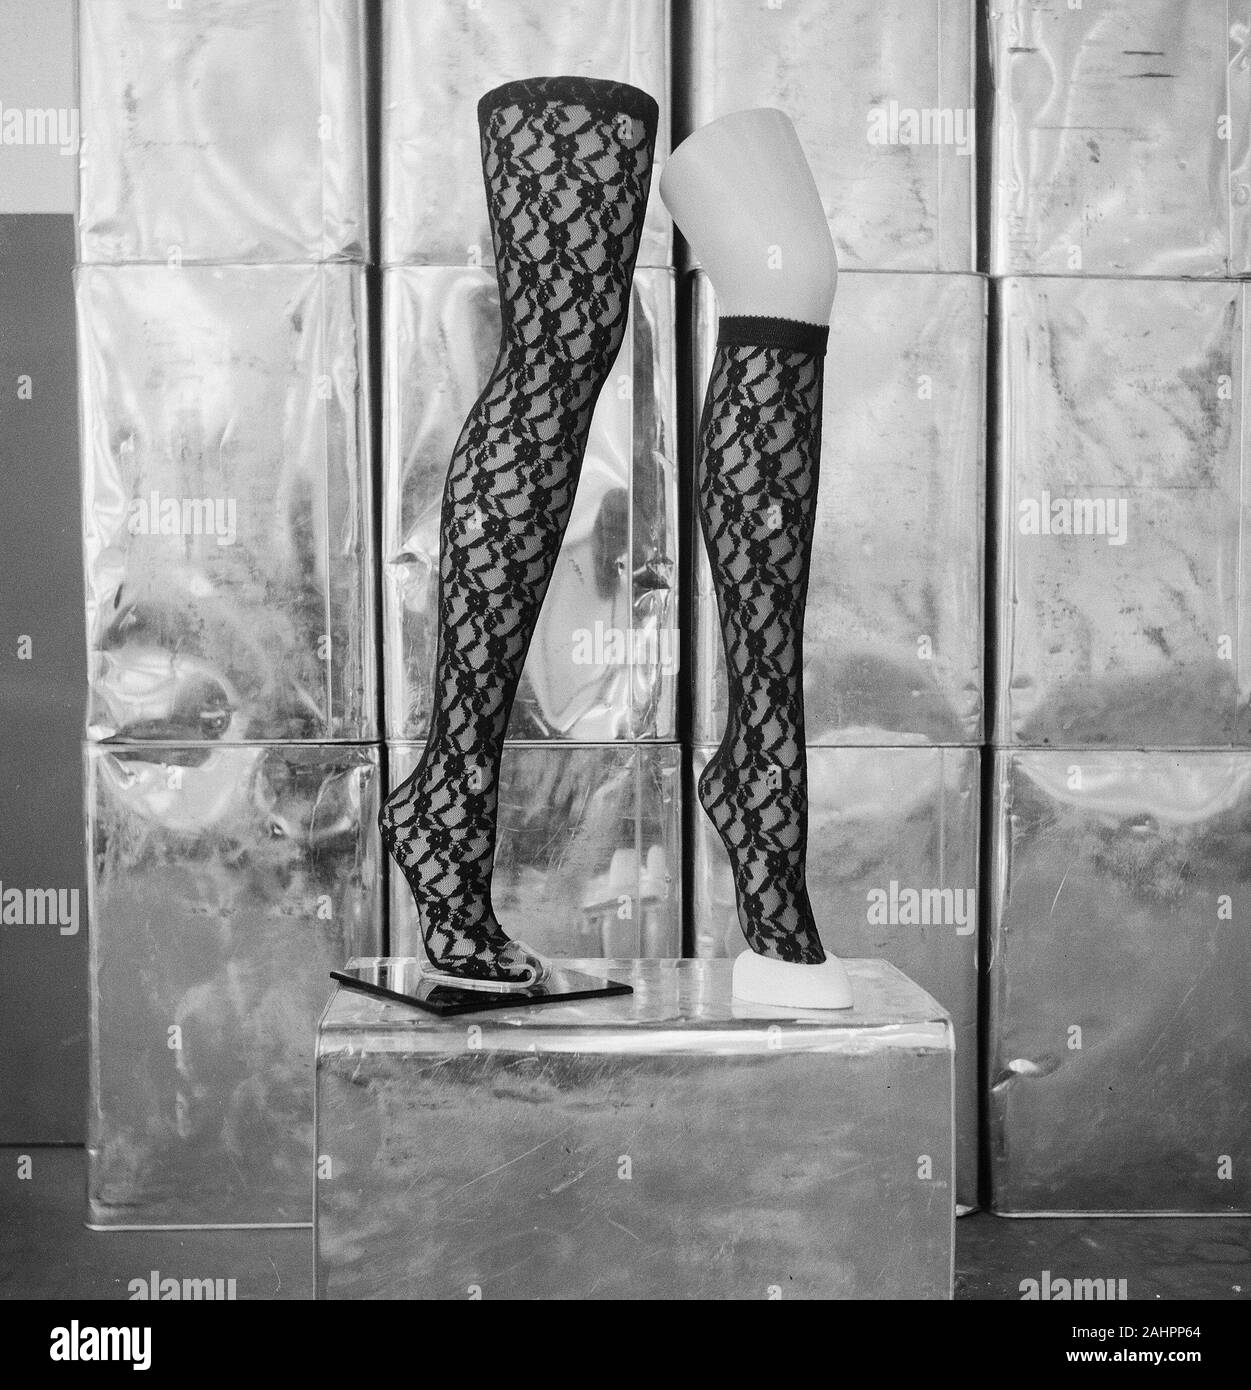 1960s stockings Black and White Stock Photos & Images - Alamy